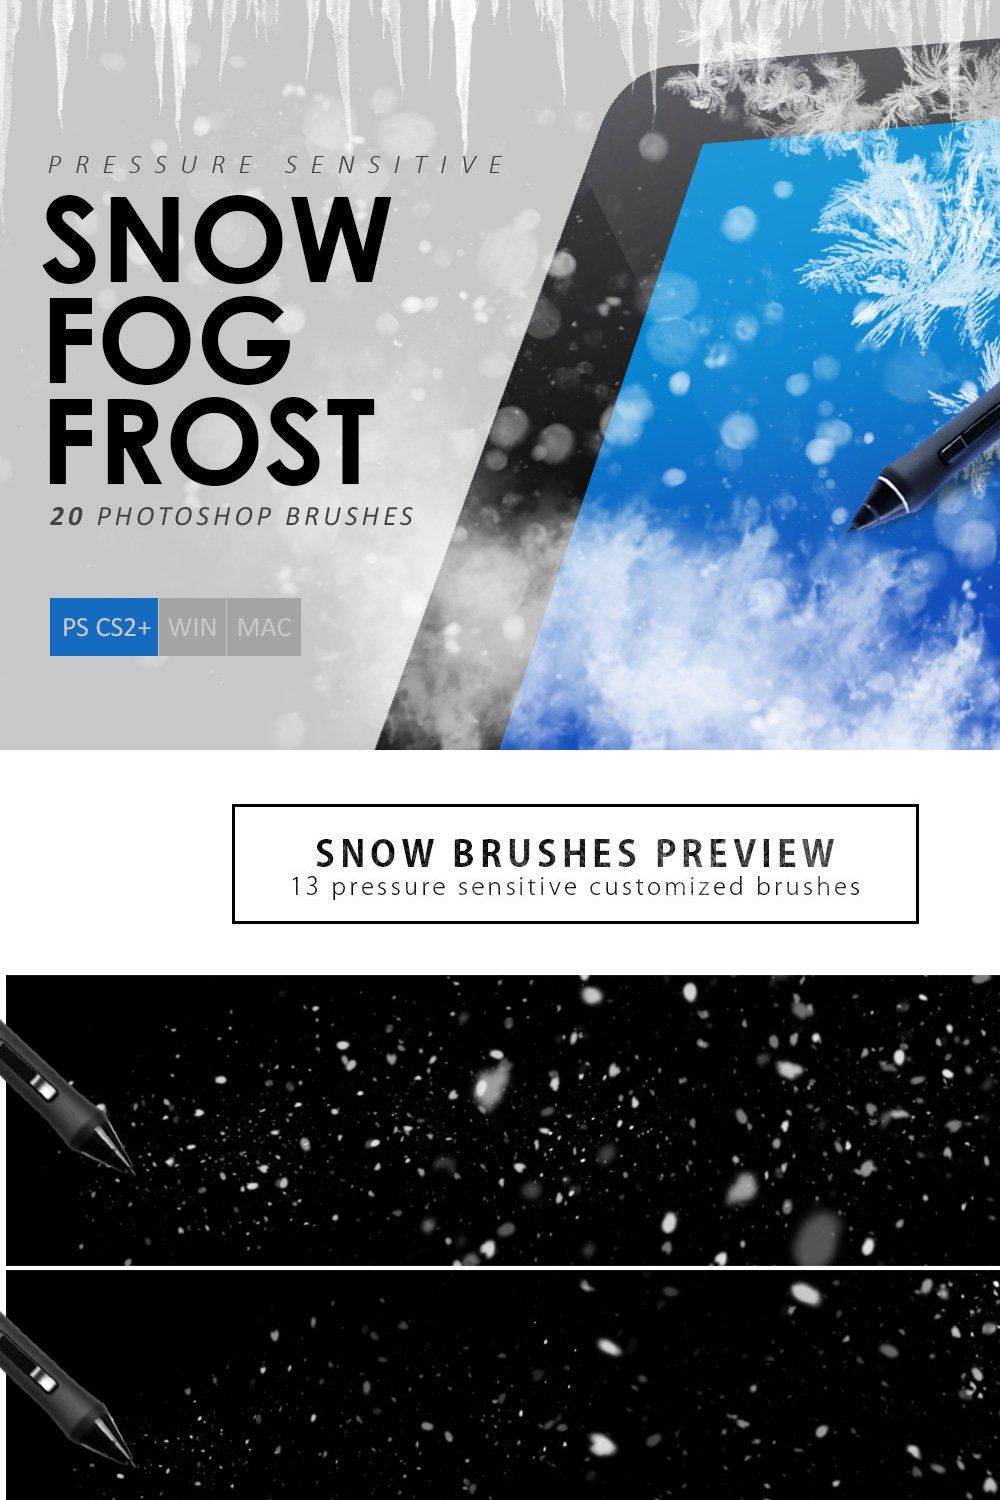 Snow, Fog, Frost Photoshop Brushes pinterest preview image.